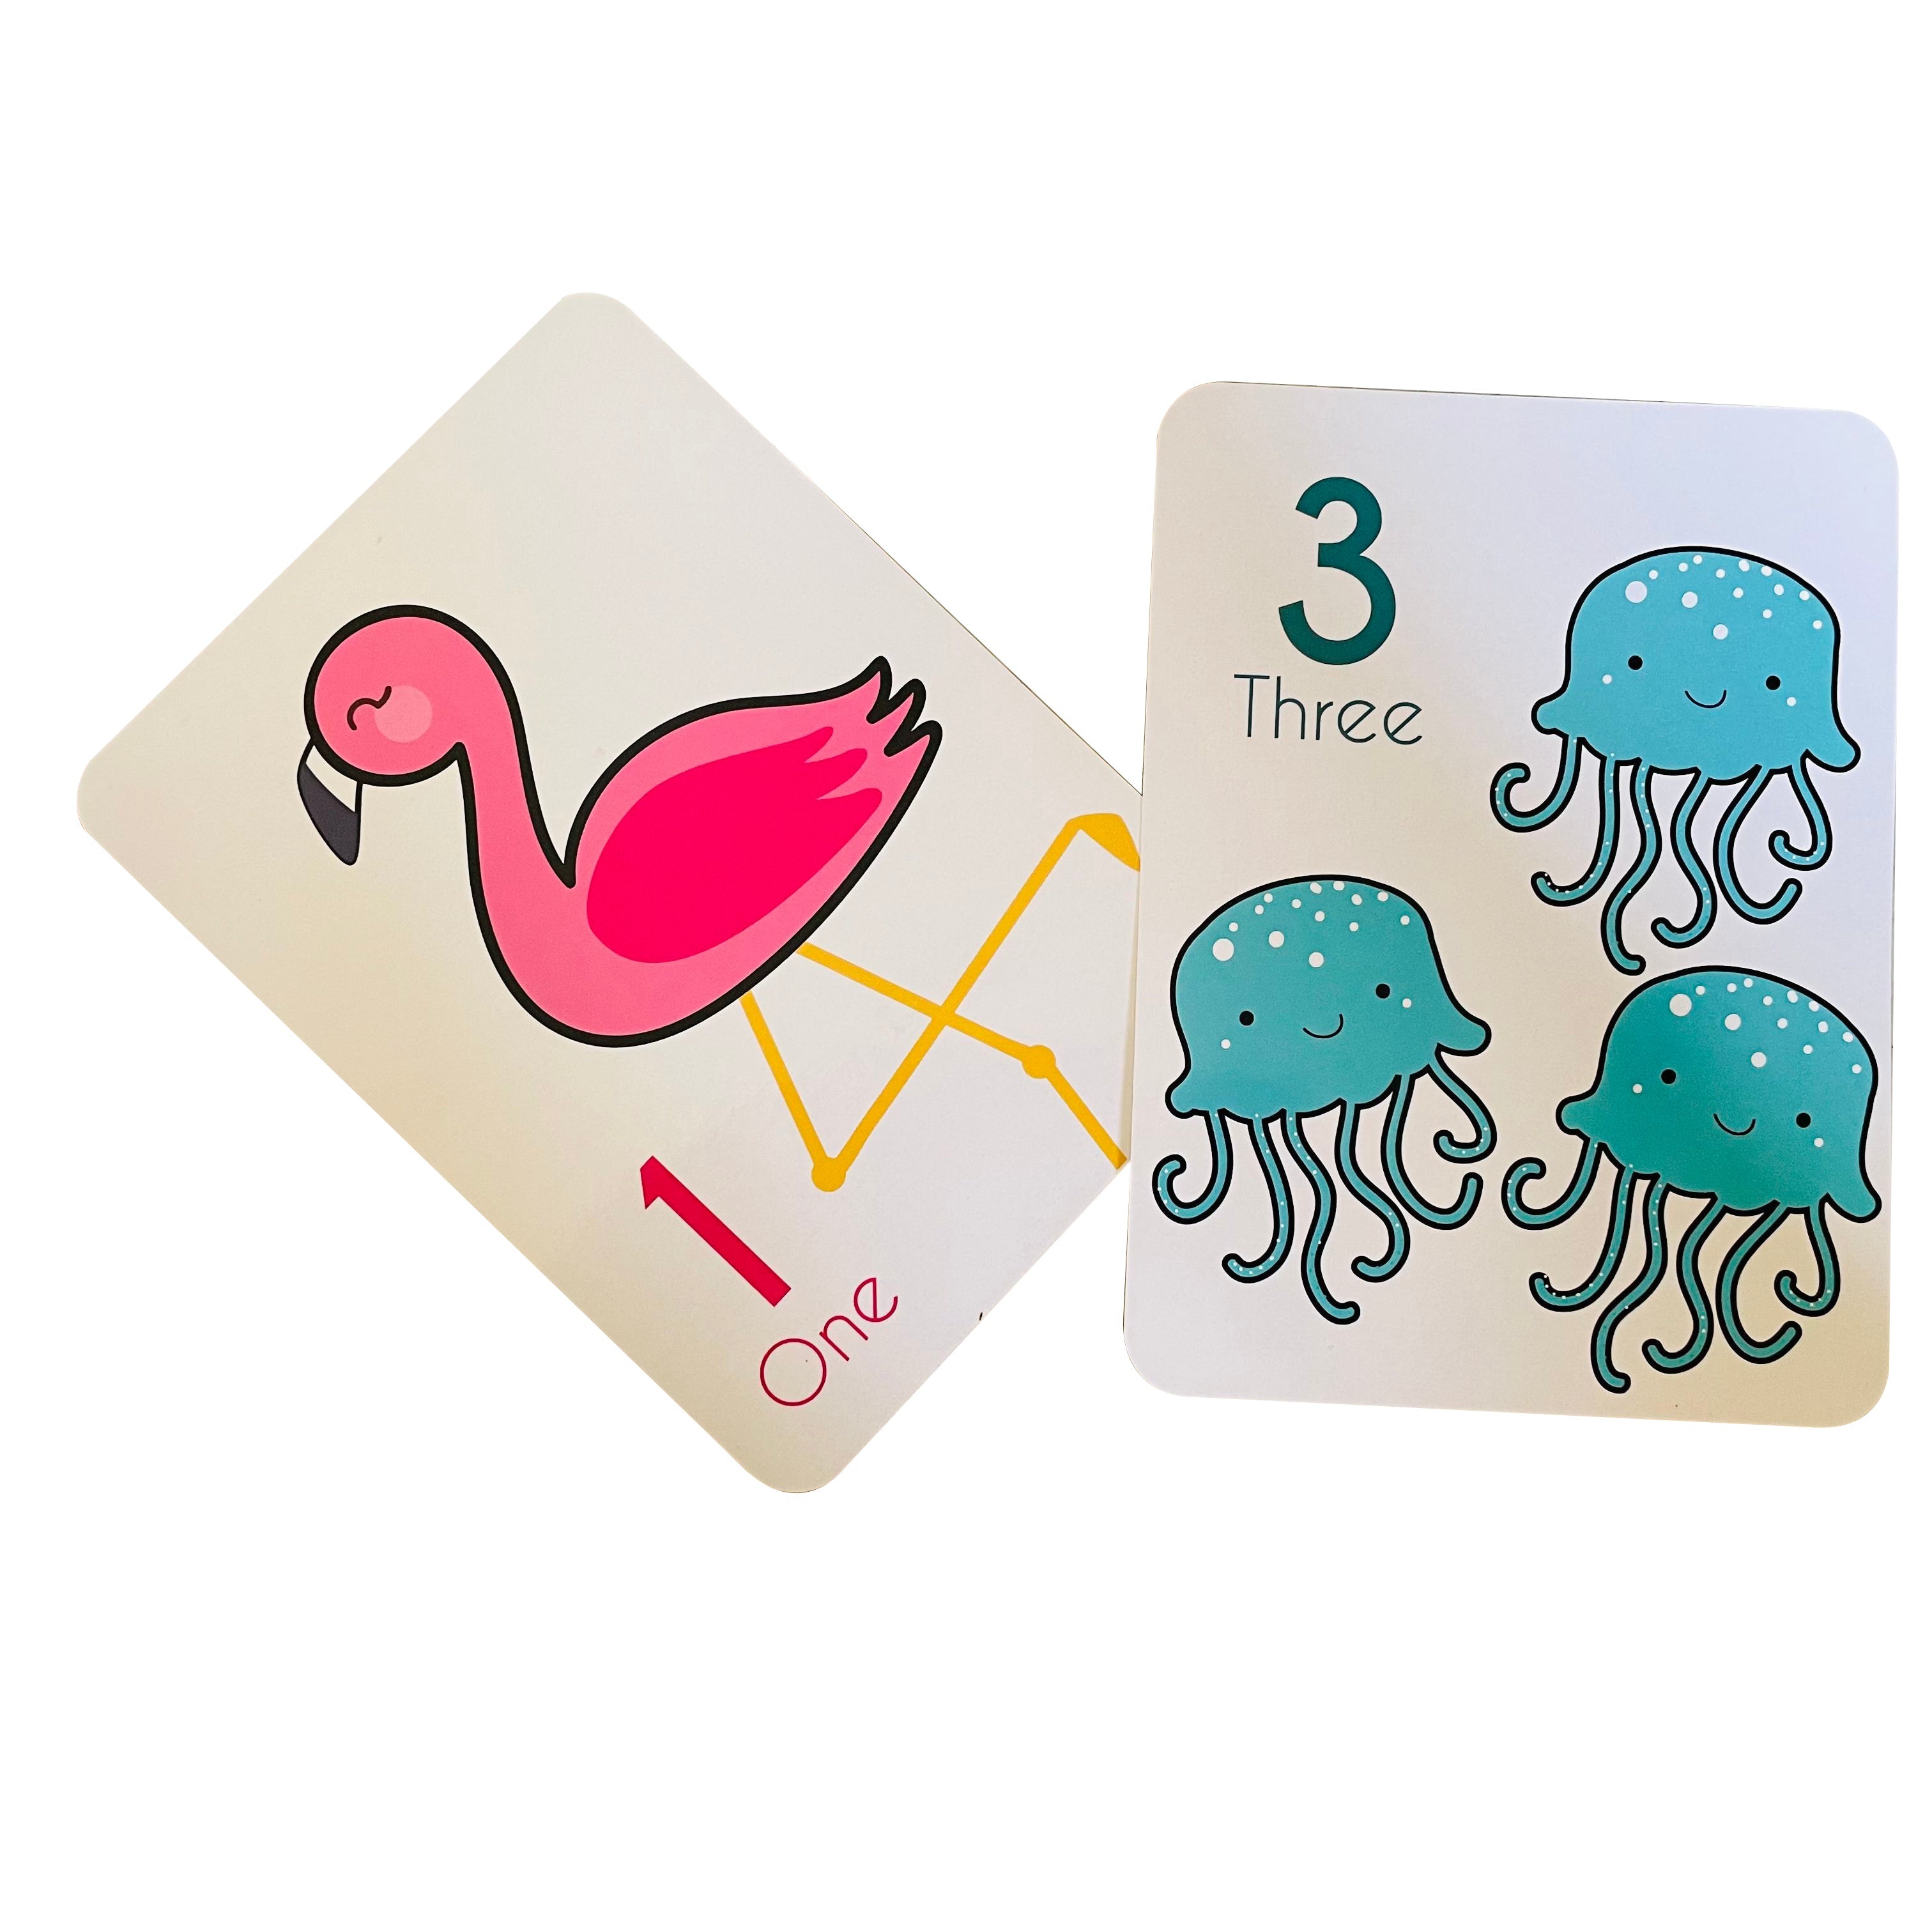 Number Flashcards and counting activity - PyaraBaby